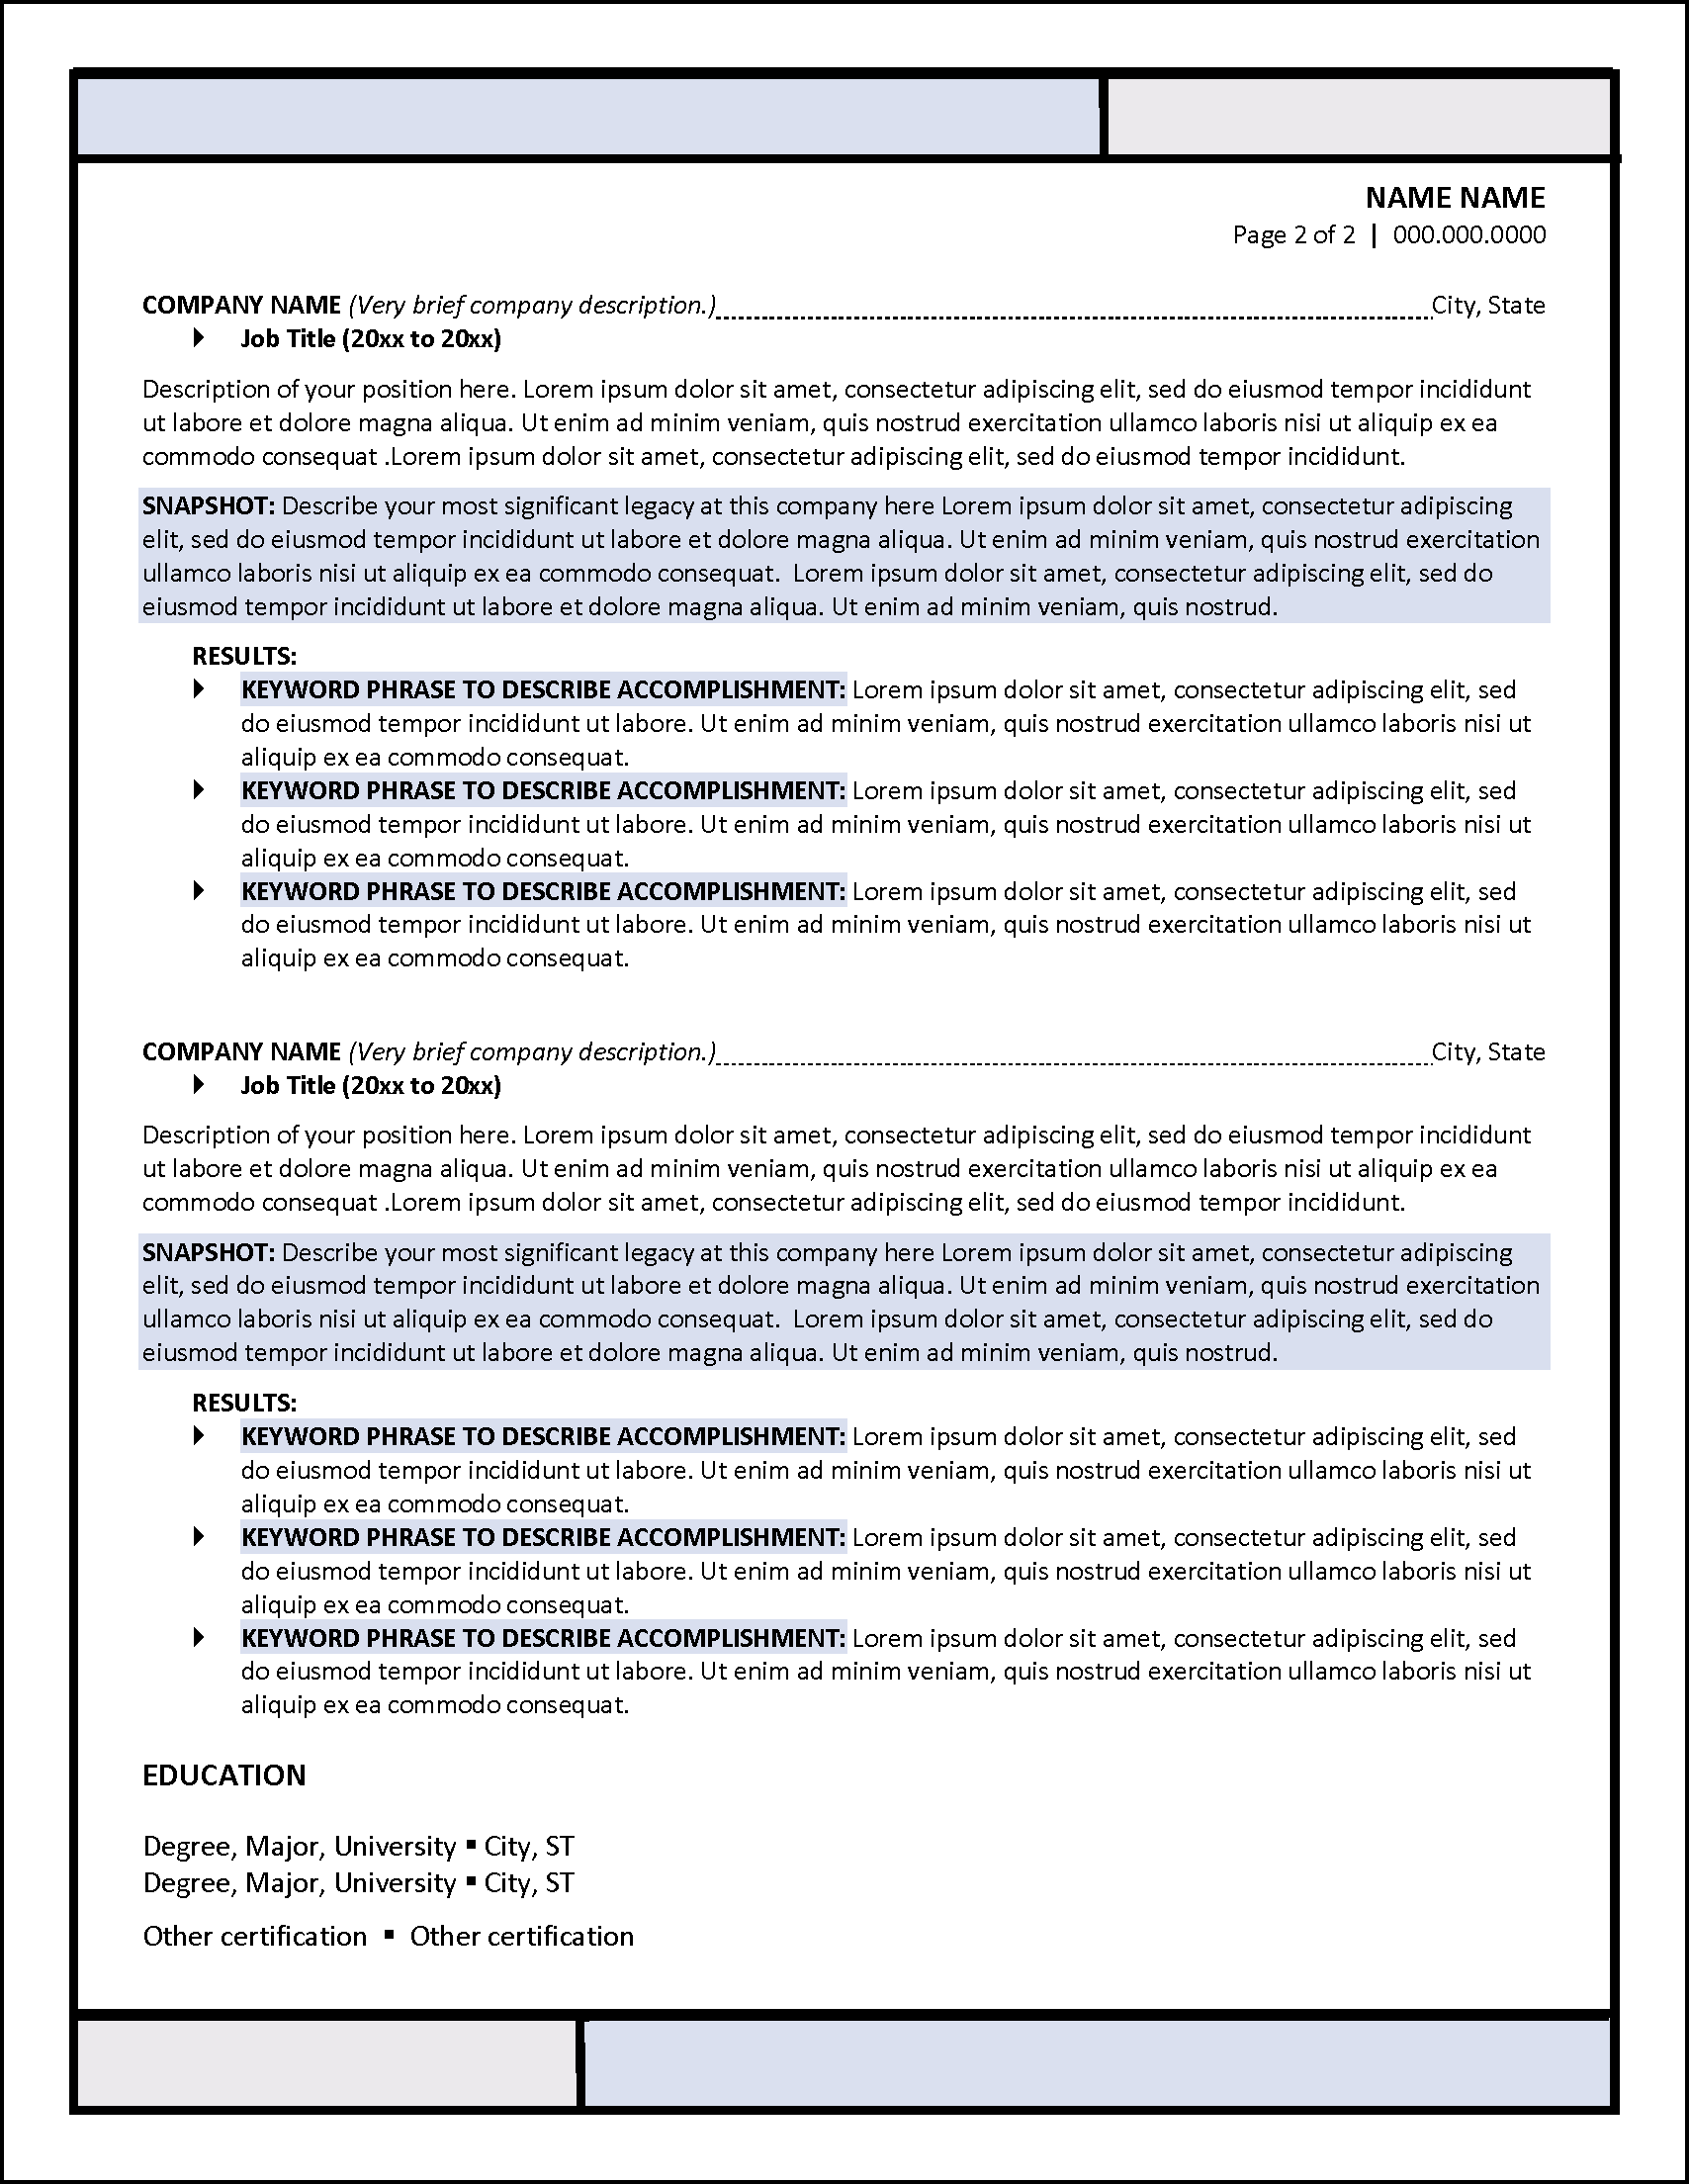 ATS-Compliant Resume Template Page 2